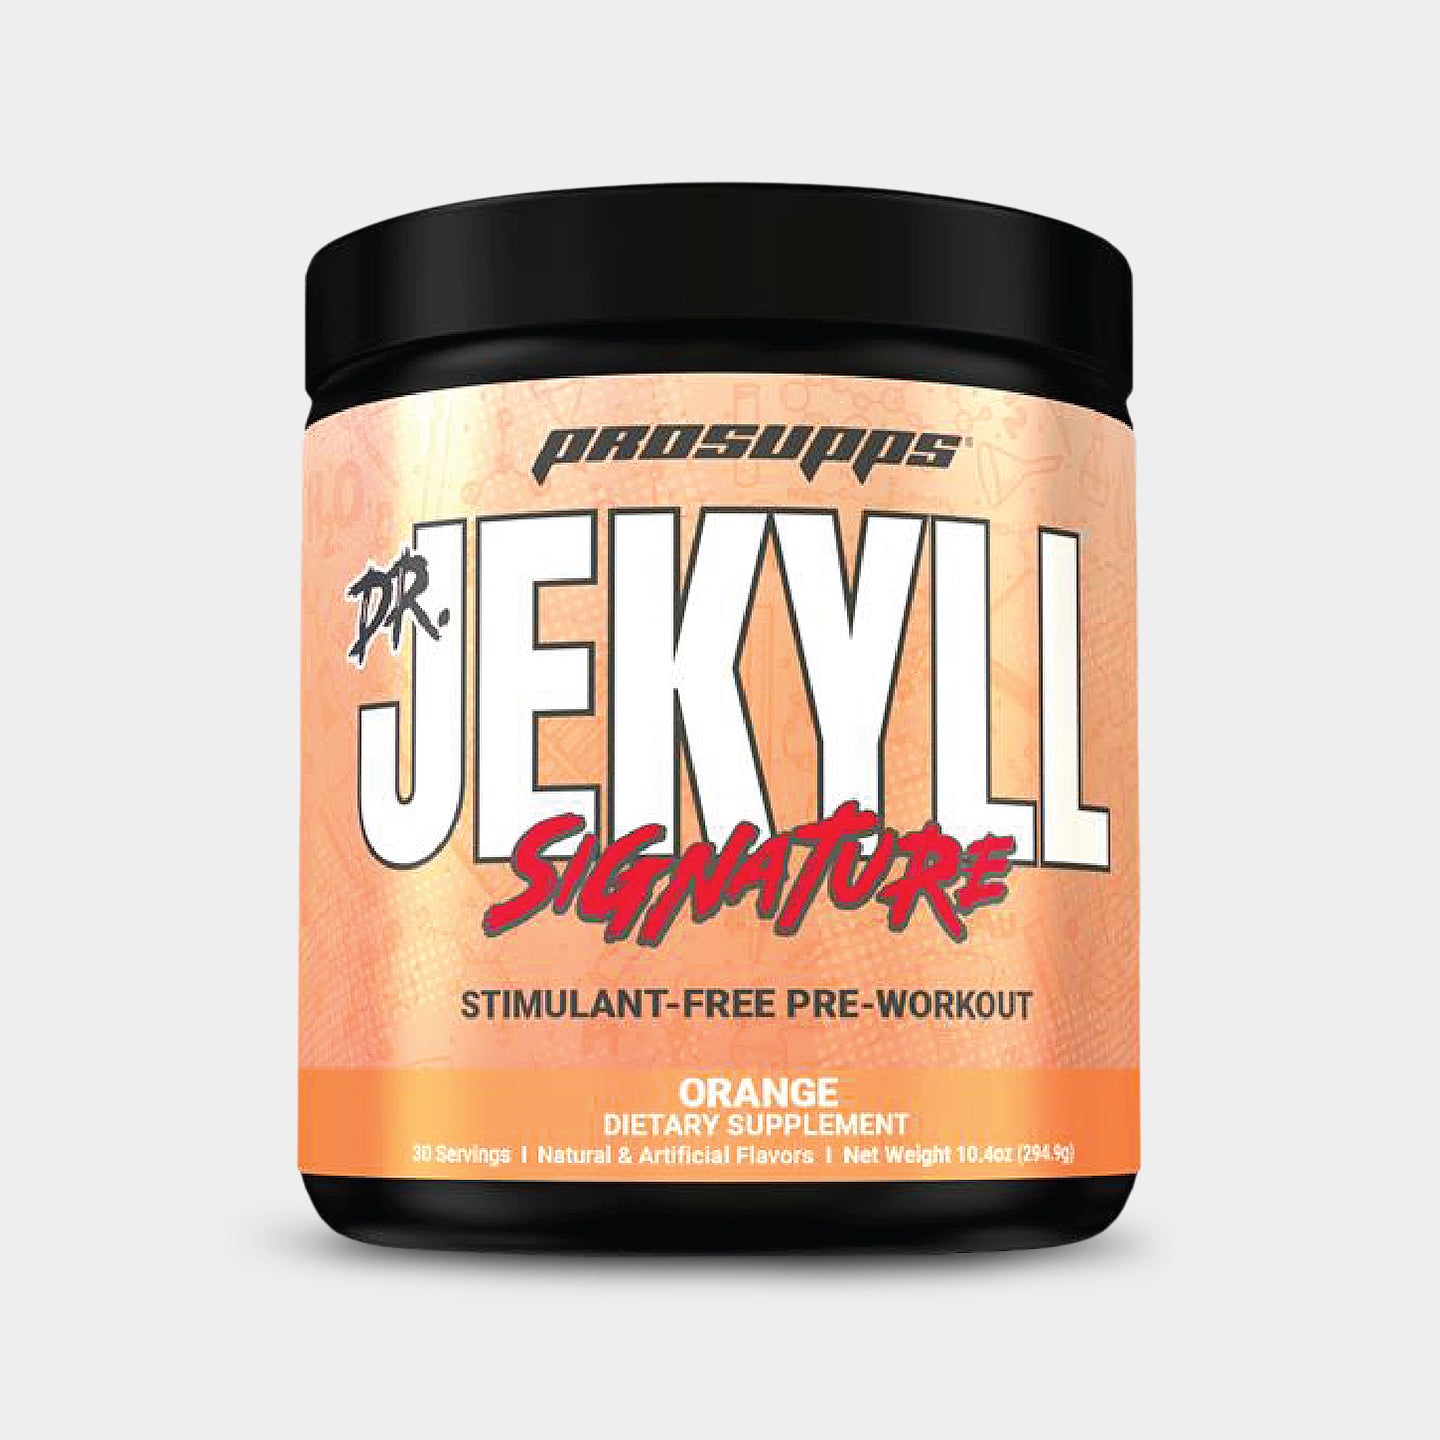 Pro Supps Dr. Jekyll Signature, Orange, 30 Servings A1